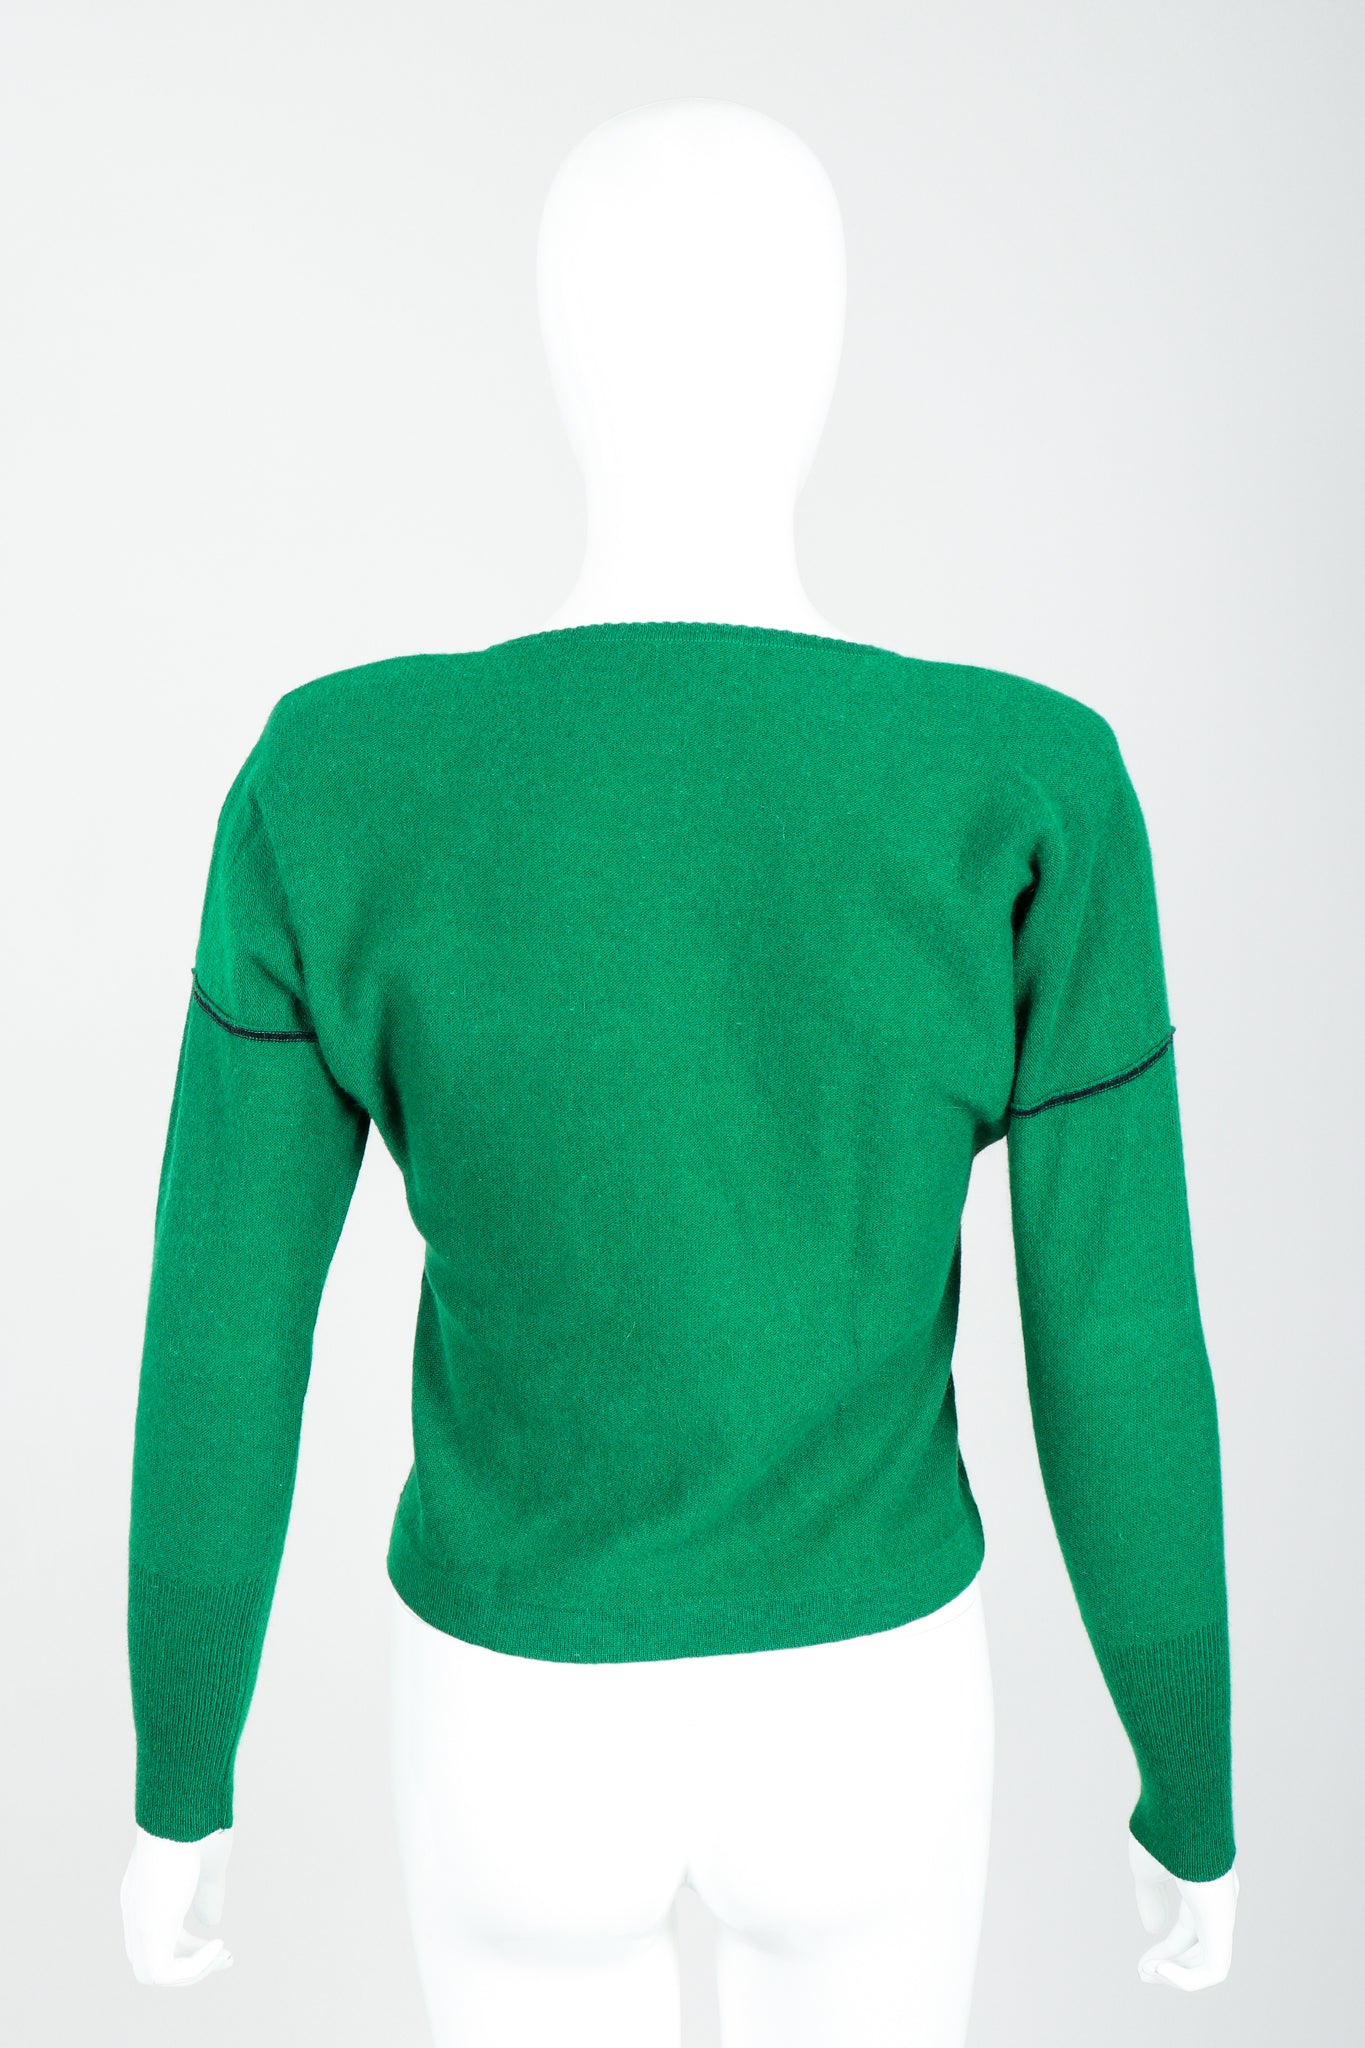 Vintage Sonia Rykiel Green Knit Triangle Yoke Sweater on Mannequin Back at Recess